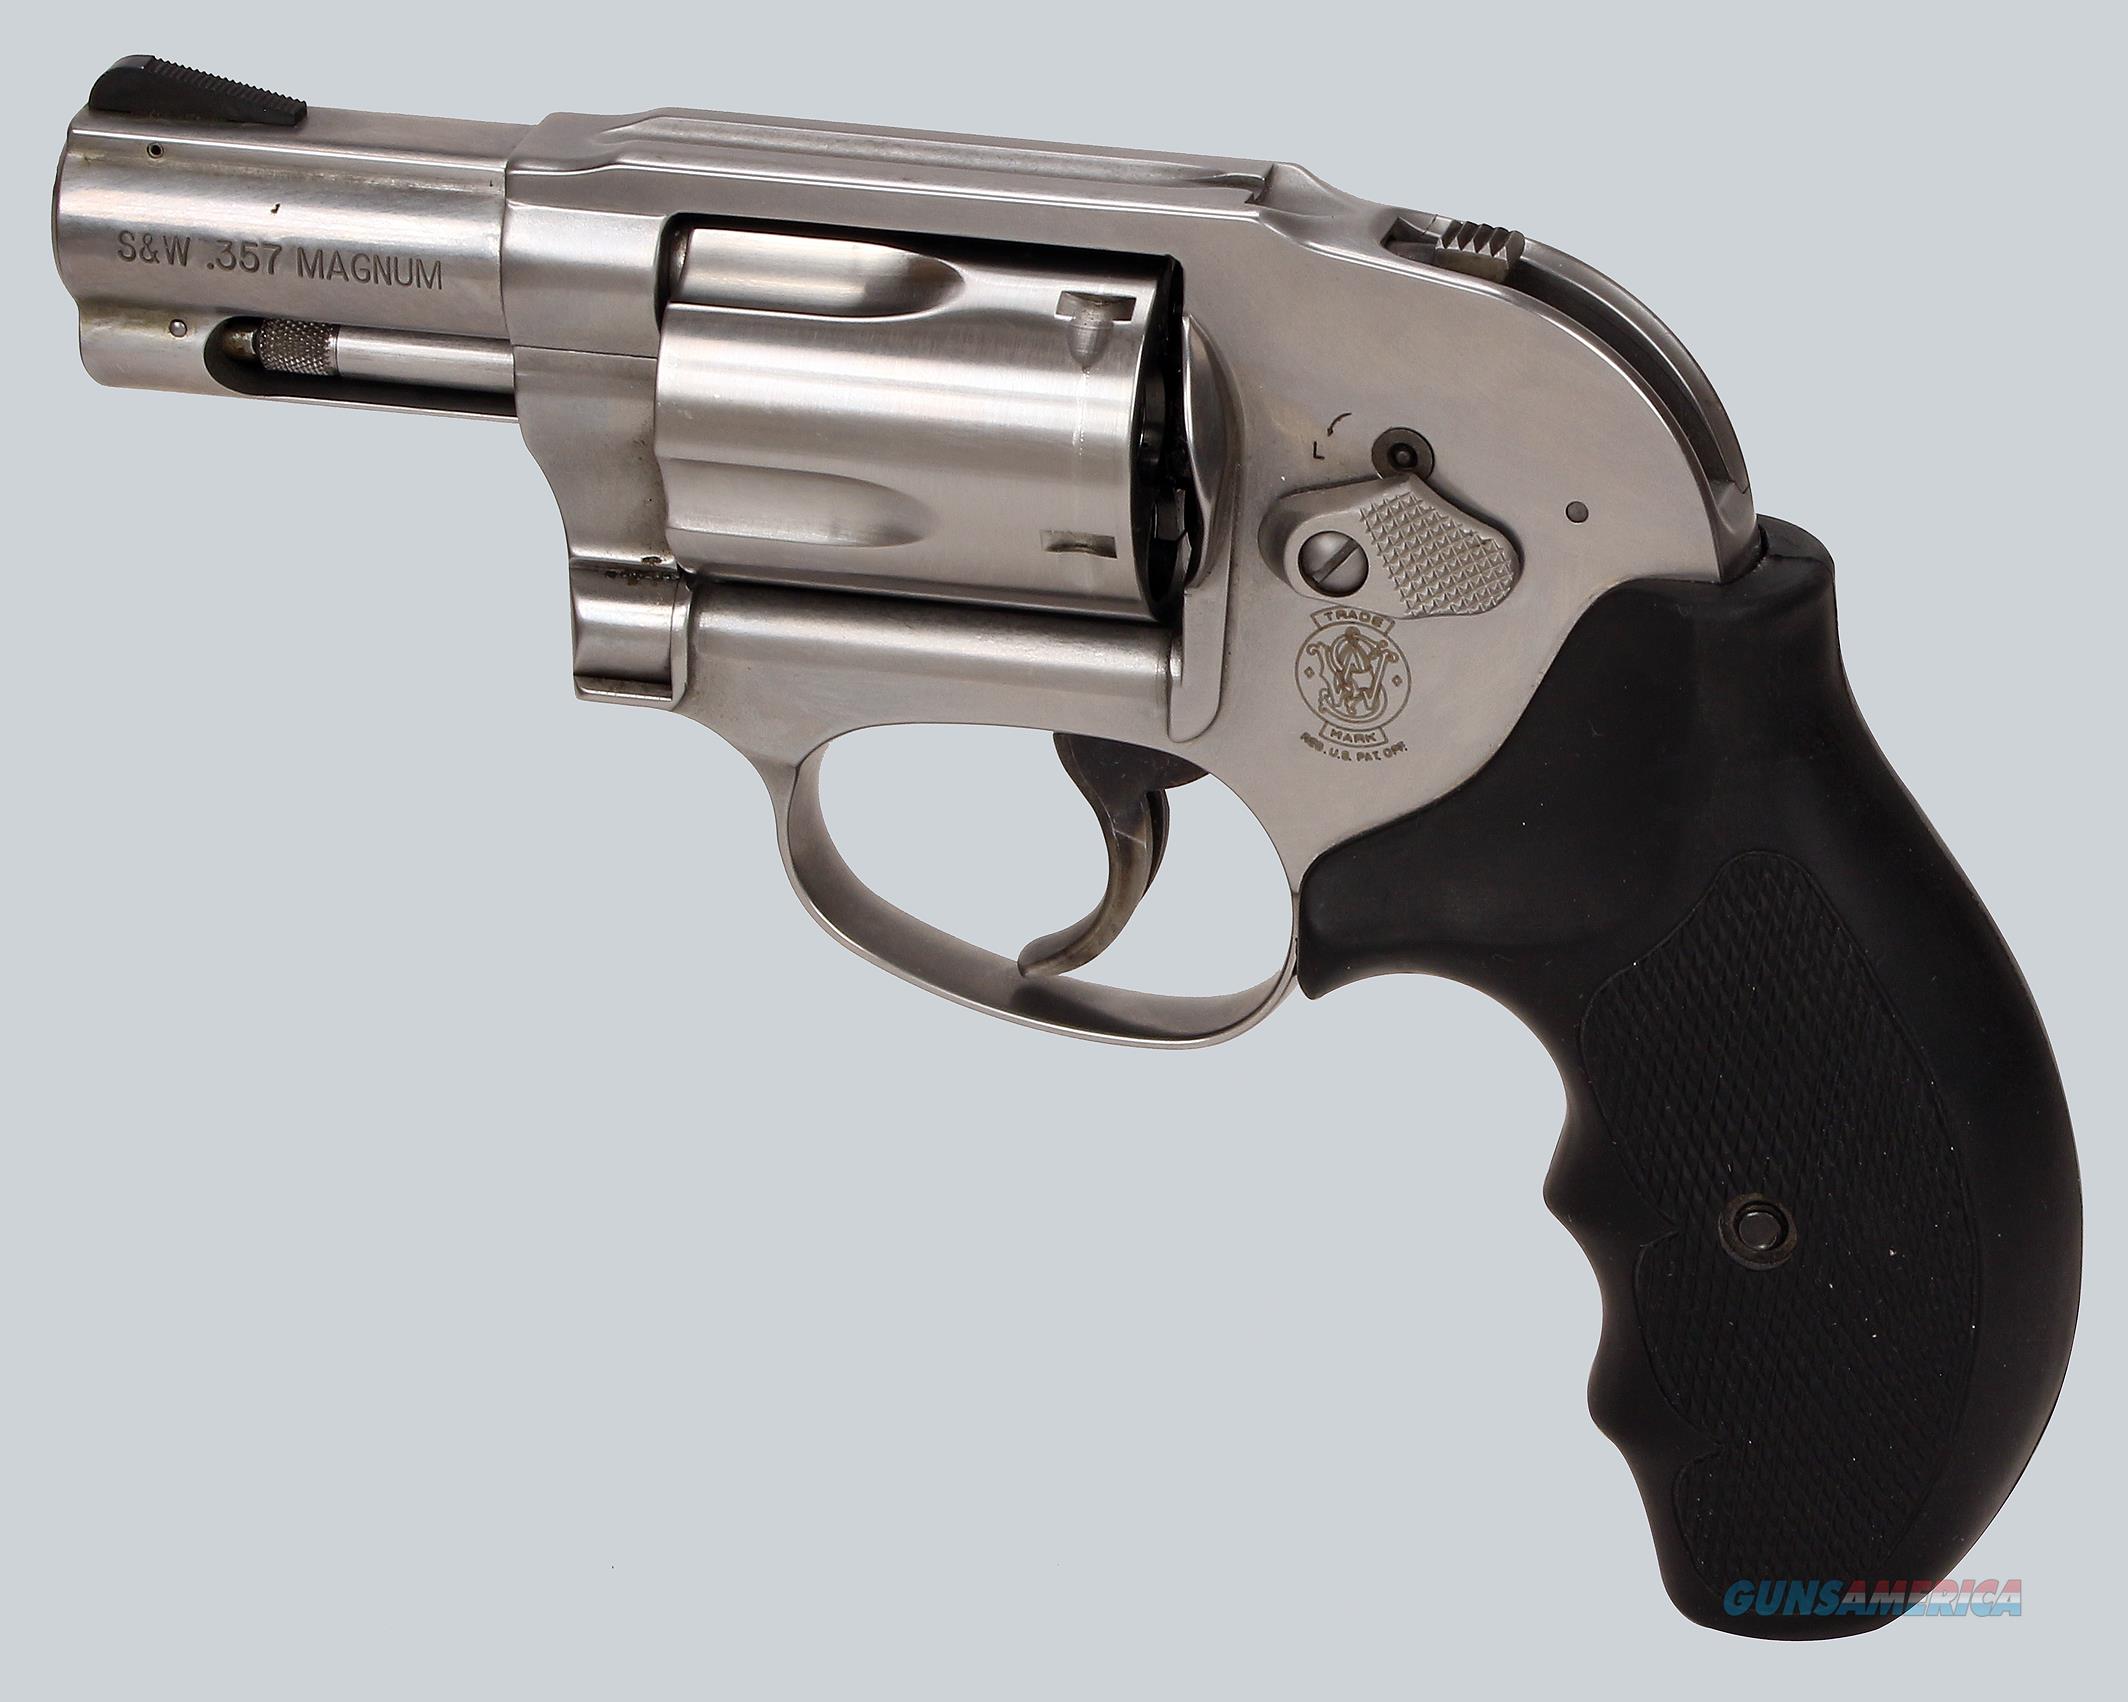 Smith And Wesson 357 Magnum Model 649 For Sale At 922772864